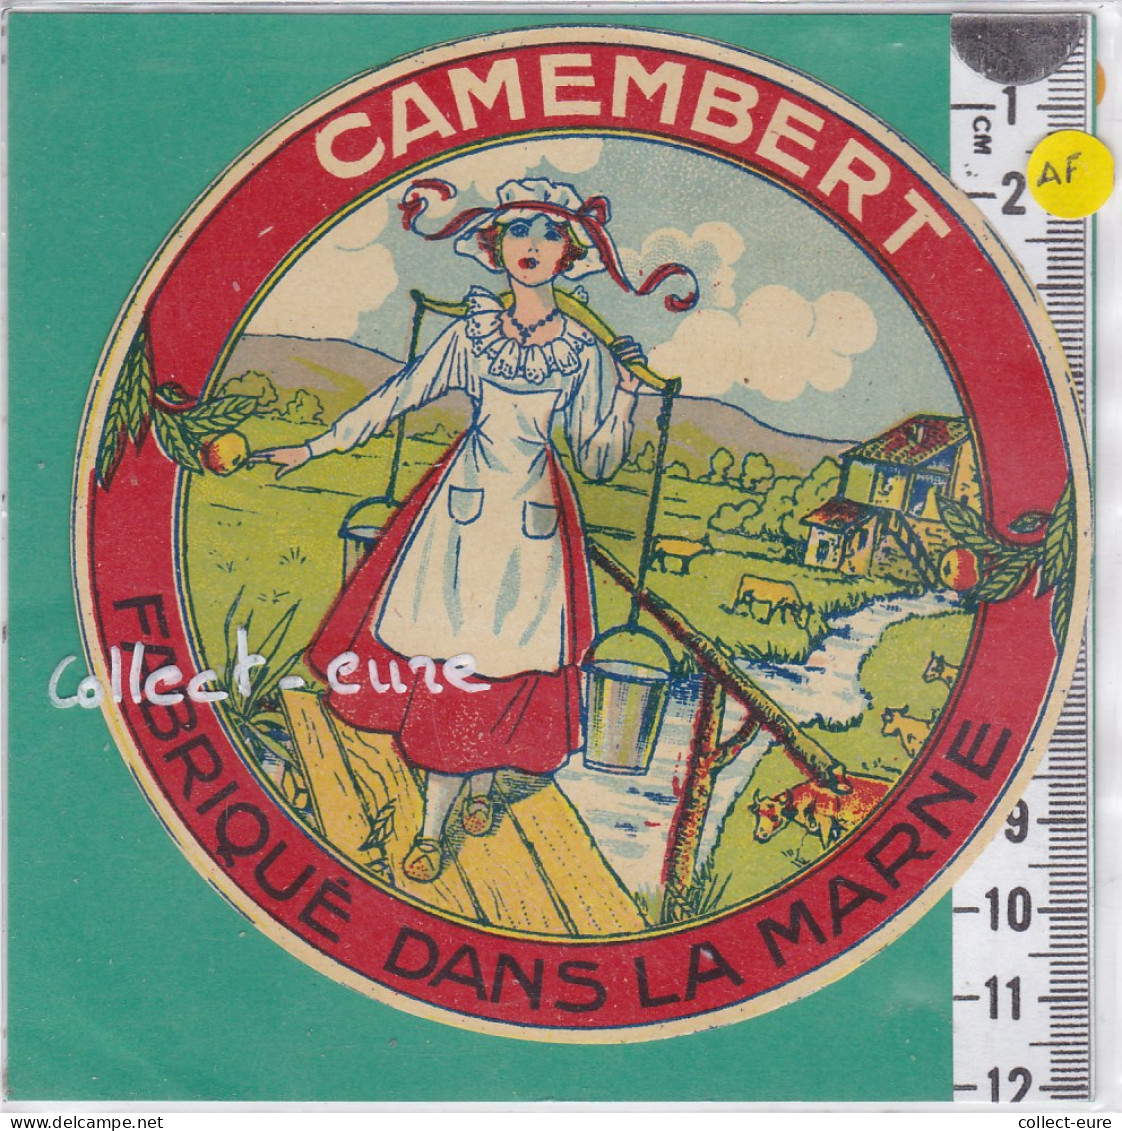 C1191 FROMAGE  CAMEMBERT  MARNE FEMME CARCAN  MOULIN A EAU  ?? RIVIERE - Cheese